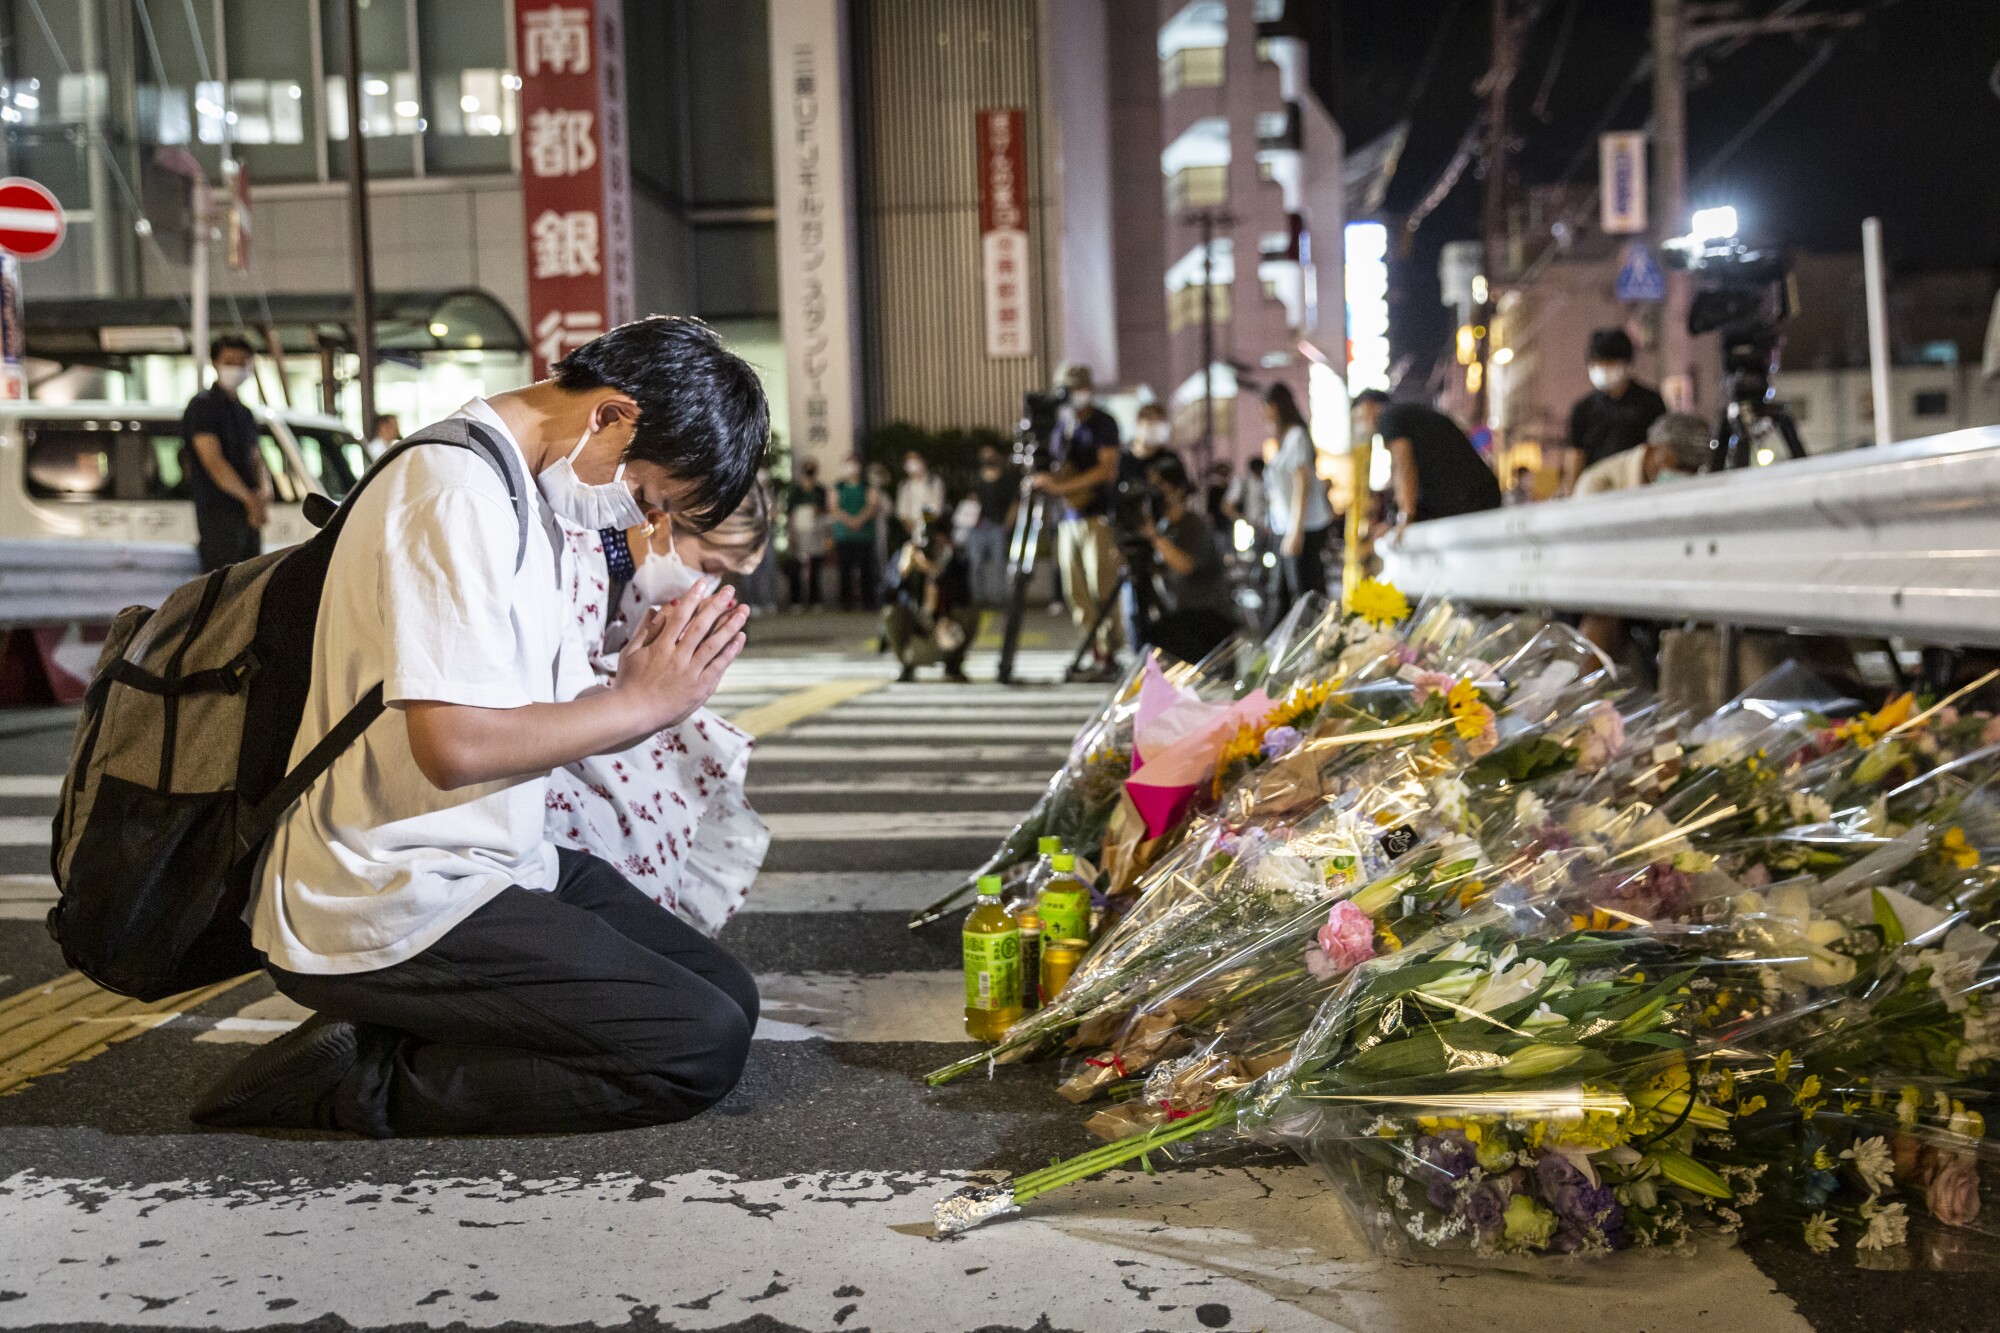 People pray at a site outside Yamato-Saidaiji train station where Japan's former Prime Minister Shinzo Abe was shot dead